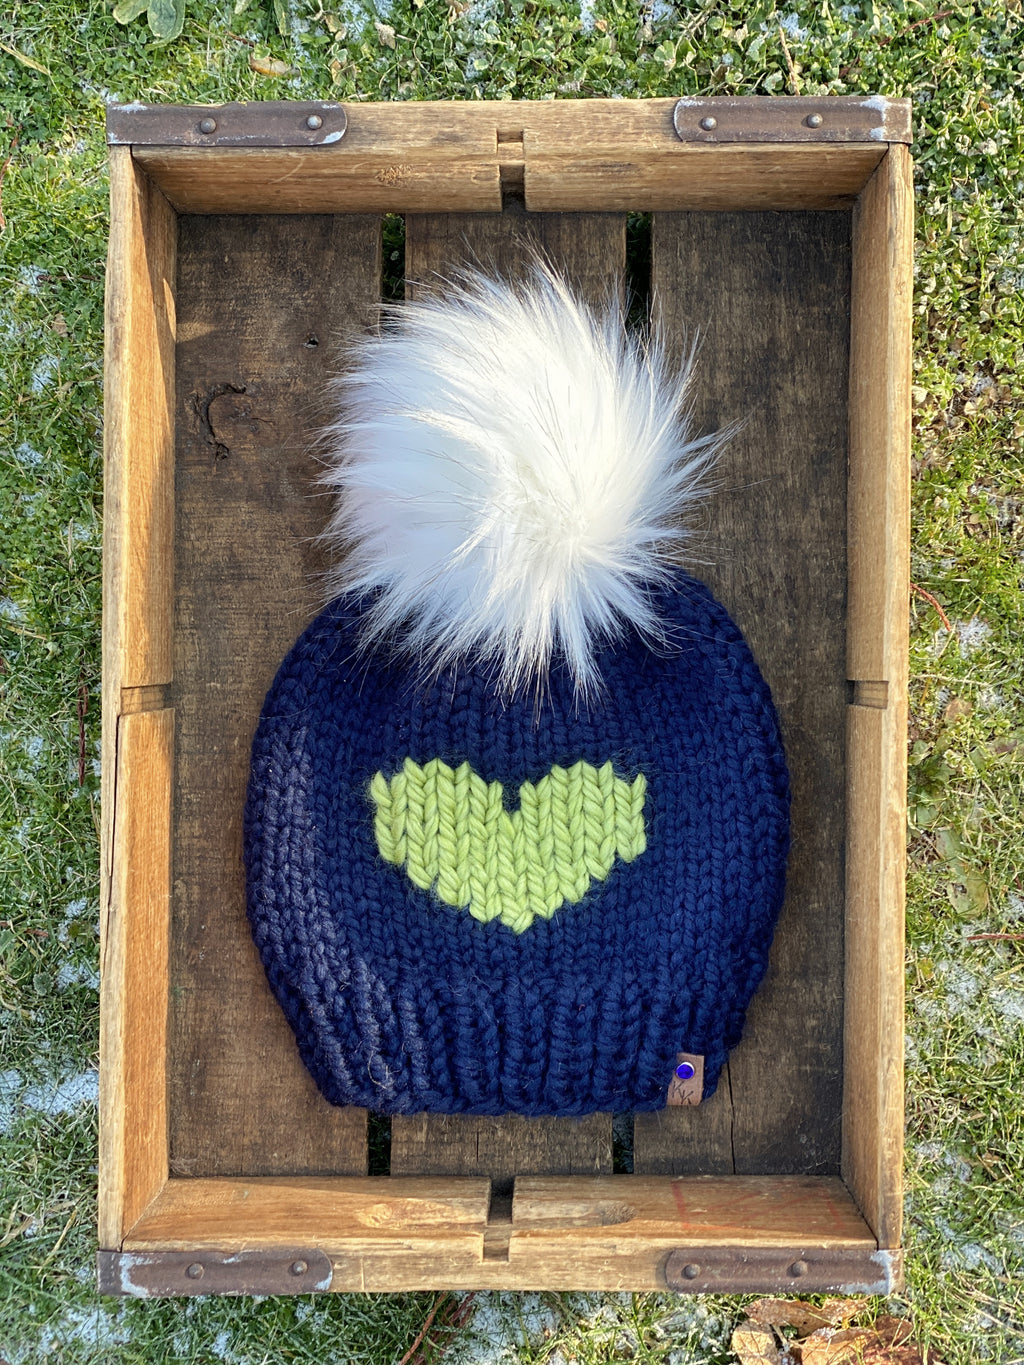 Seattle Seahawks Inspired Green and Blue Heart Hand Knit Beanie Wool Blend Hat Faux Fur Pom Adult Womens Size